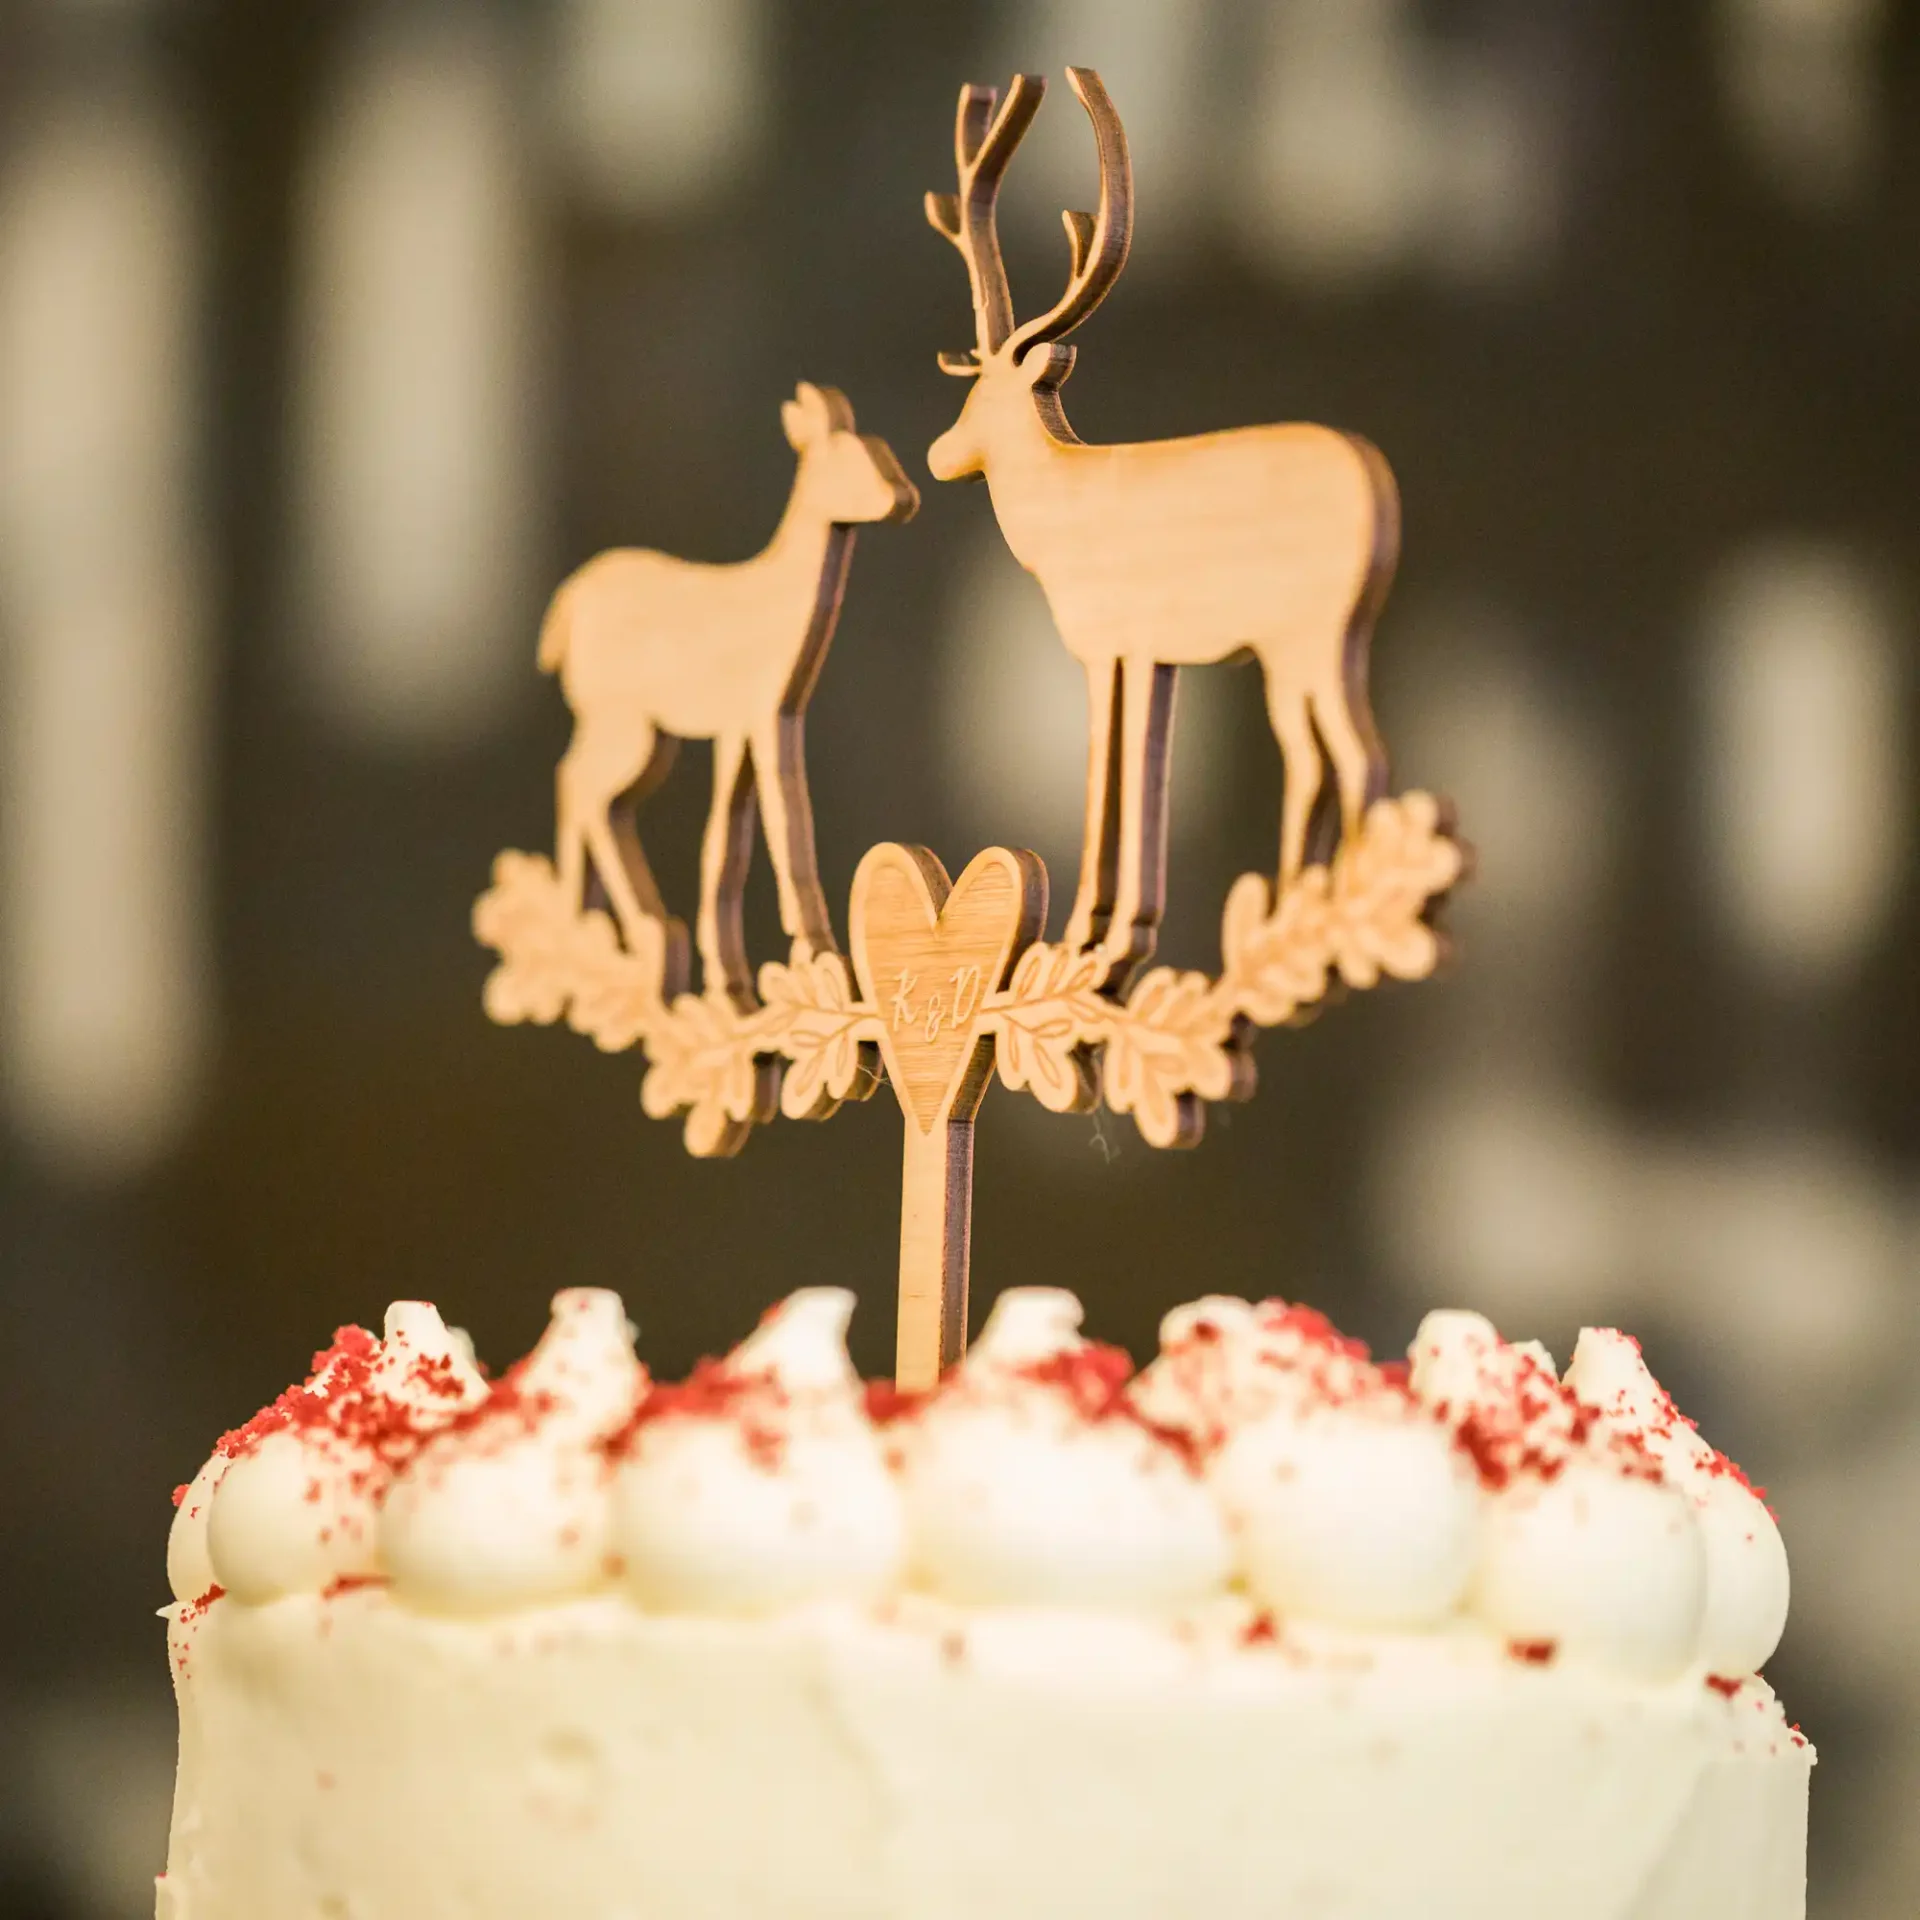 A close-up of a cake topper featuring two deer figures surrounded by a heart, on top of a cake with white icing and decorative red sprinkles.